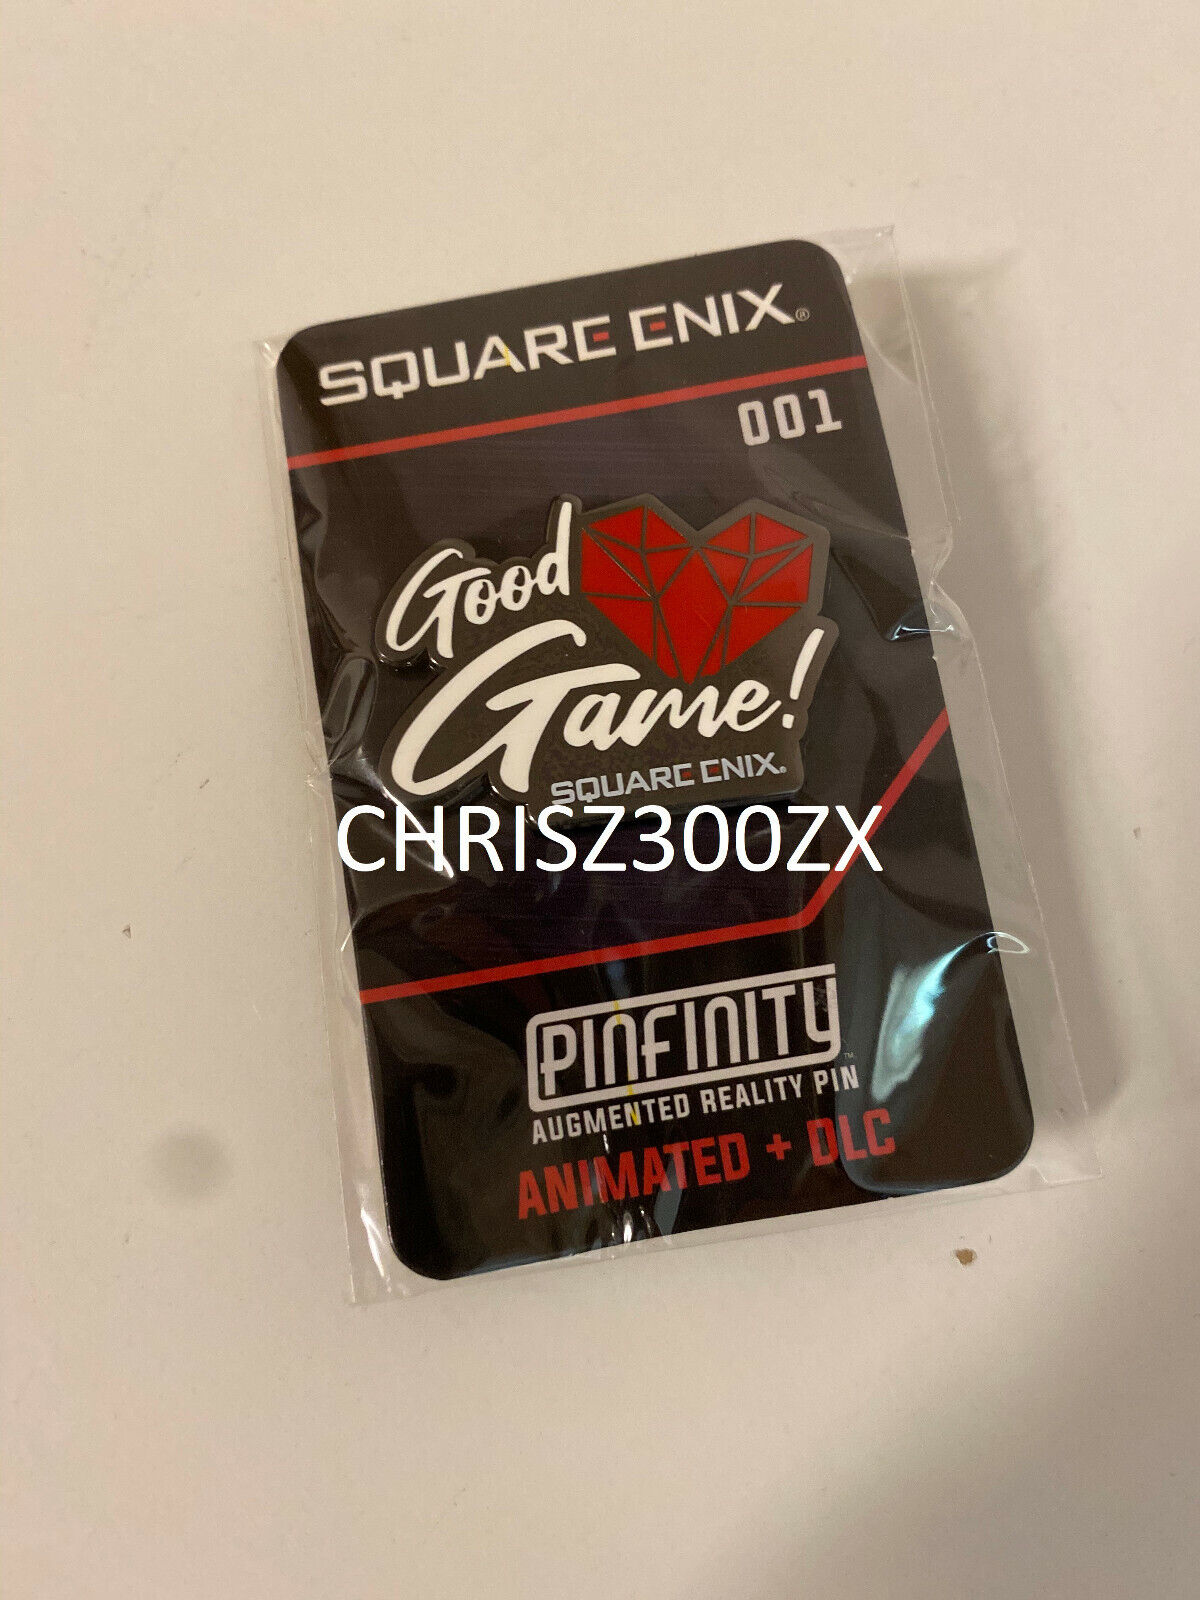 Square Enix Good Game Augmented Reality Pin Pinfinity Animated DLC 001 Endwalker